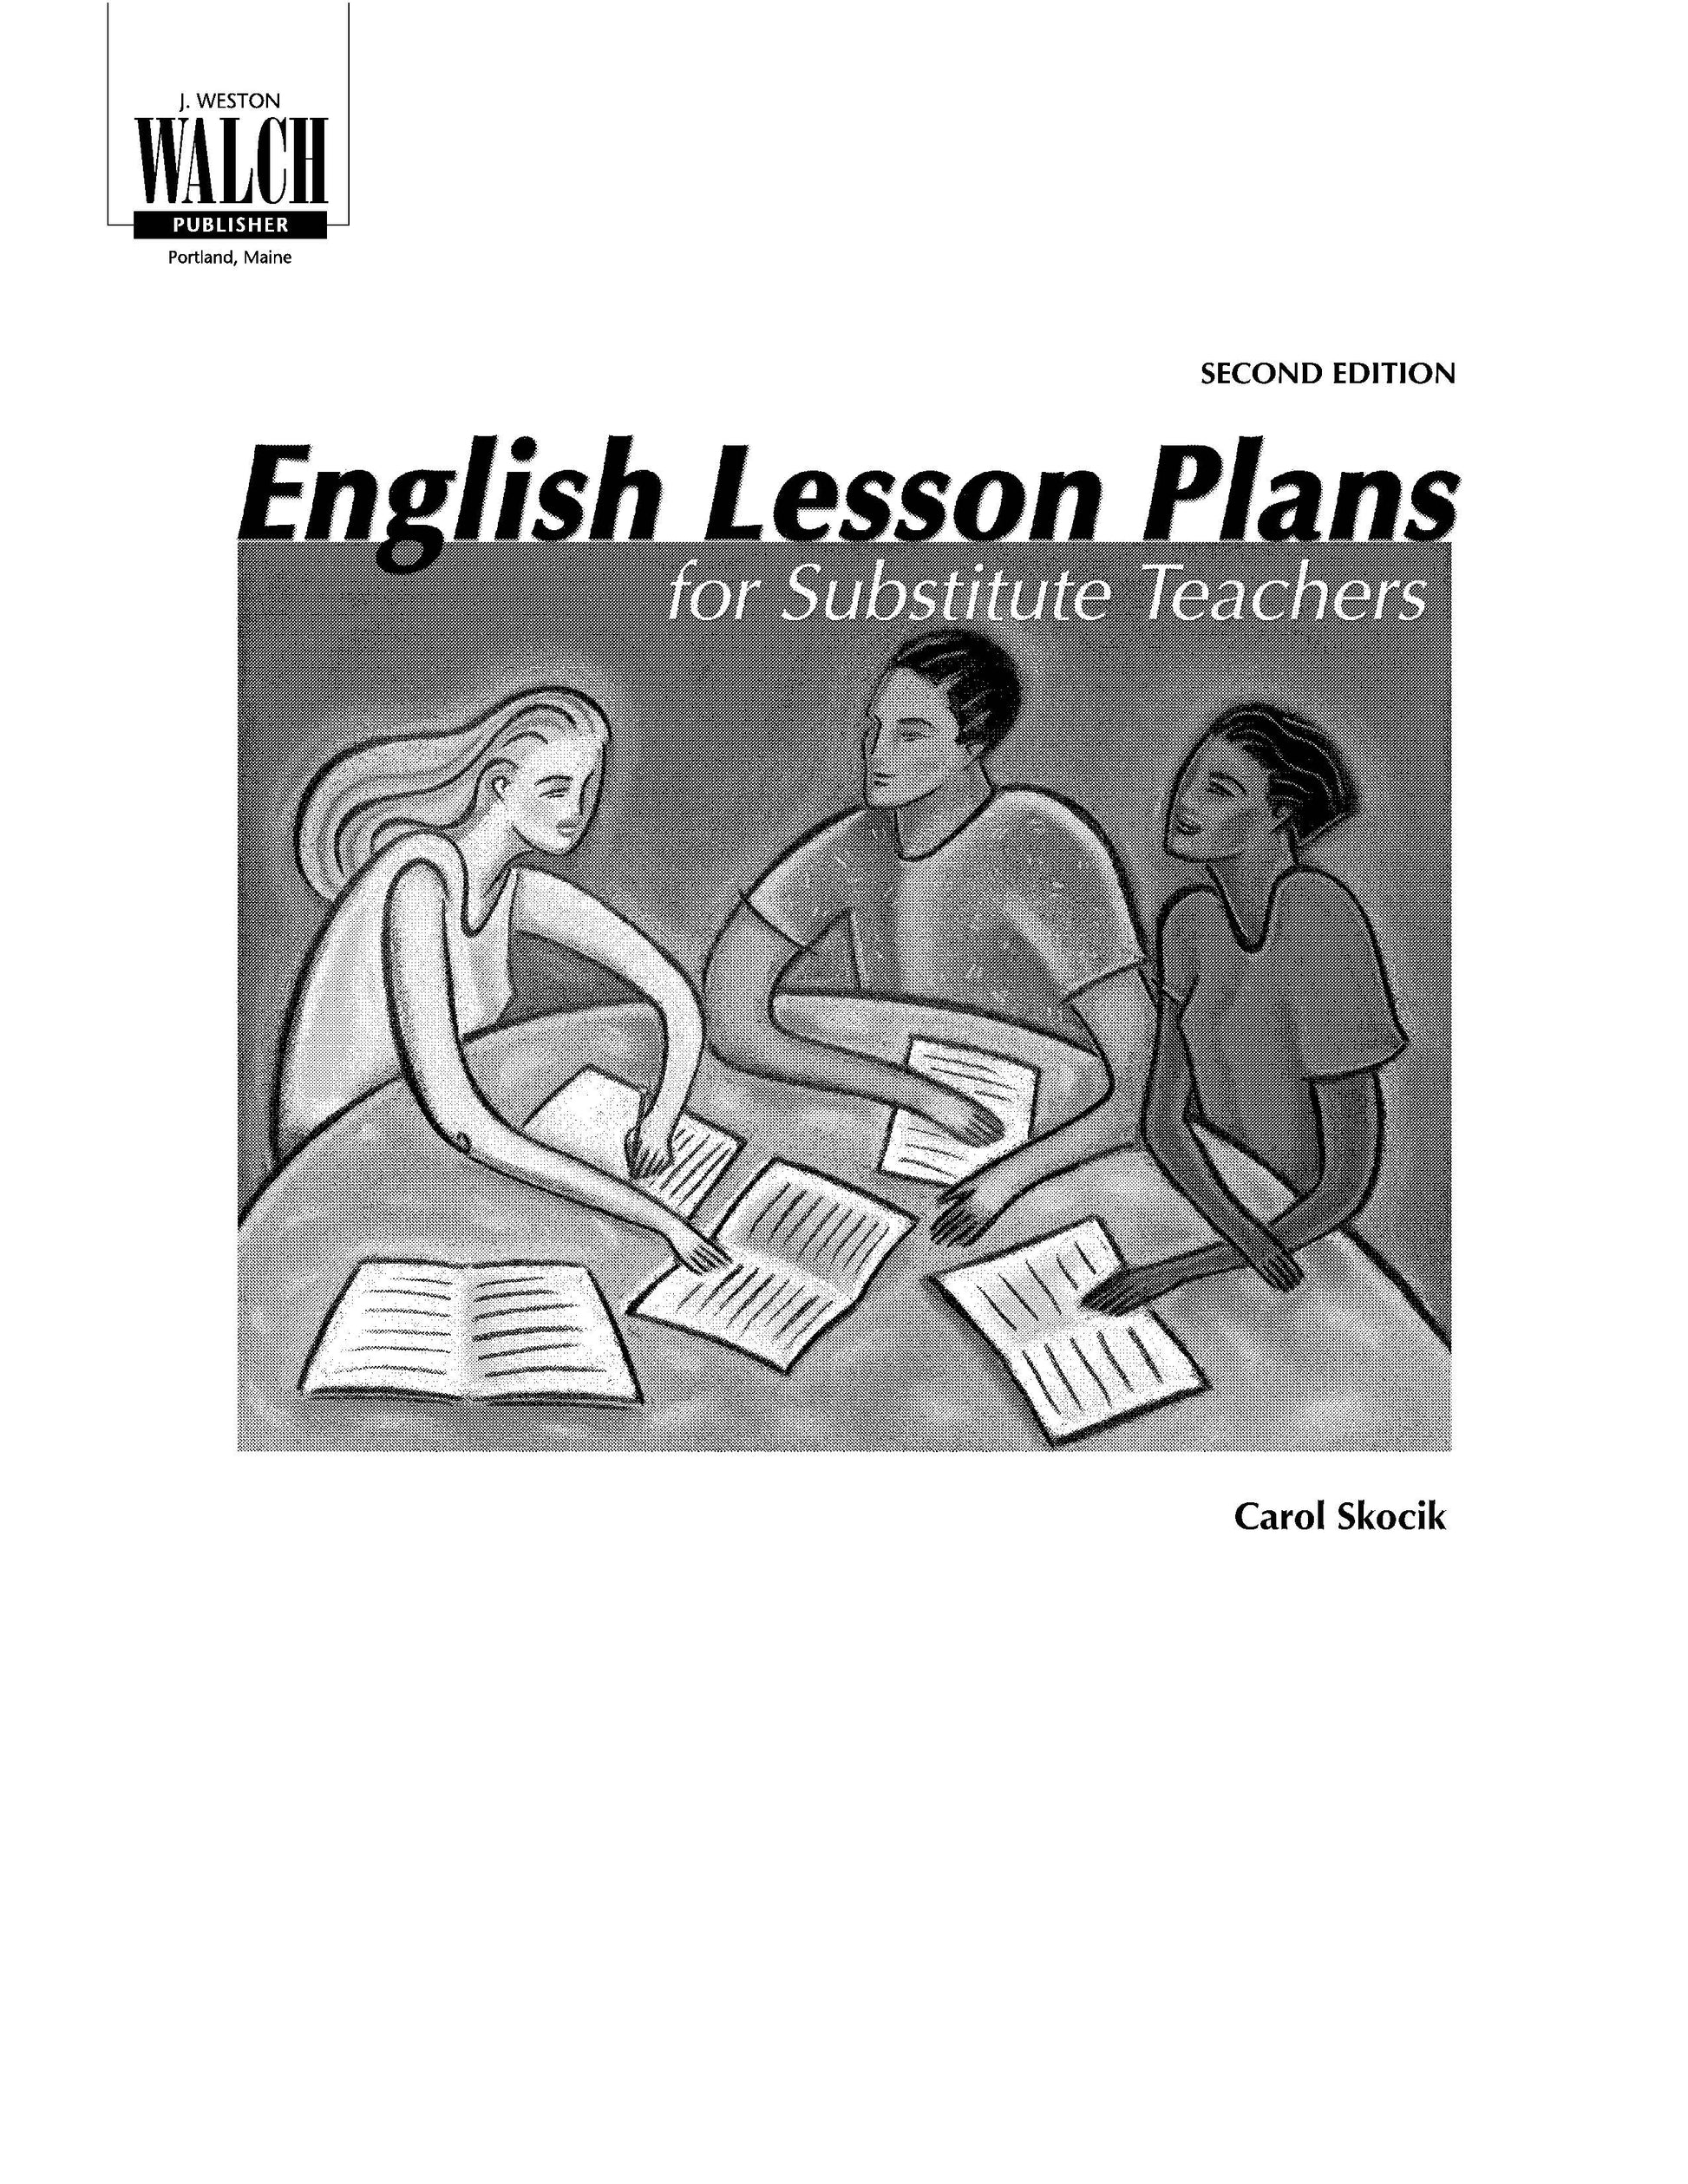 English Lesson Plans for Substitute Teachers, Bright Education Australia, Book, Grammar, English, School Materials, Games, Puzzles, Activities, Teaching Resource